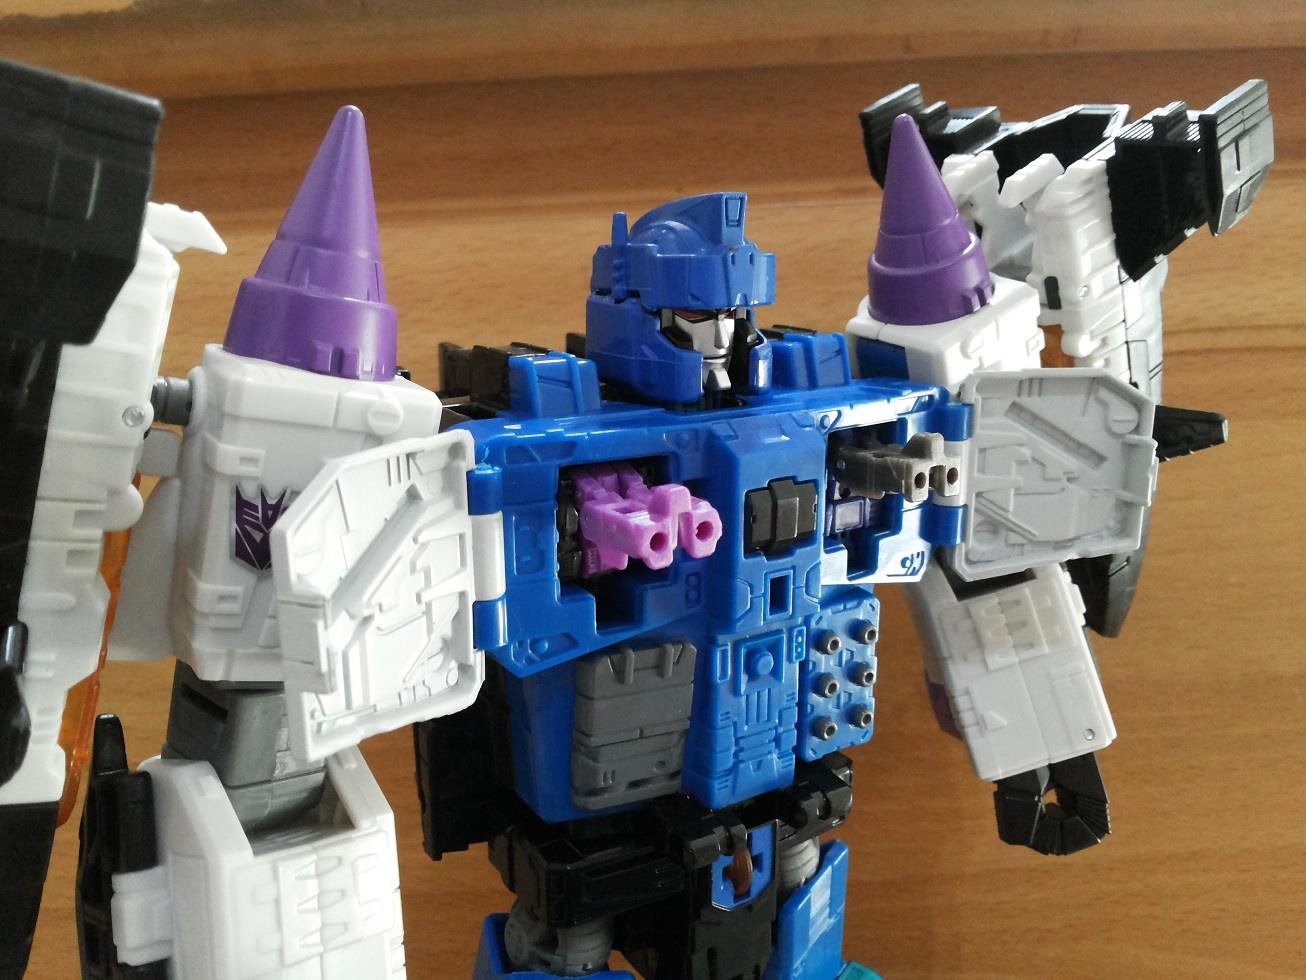 More In-Hand Images of Transformers Titans Return Overlord